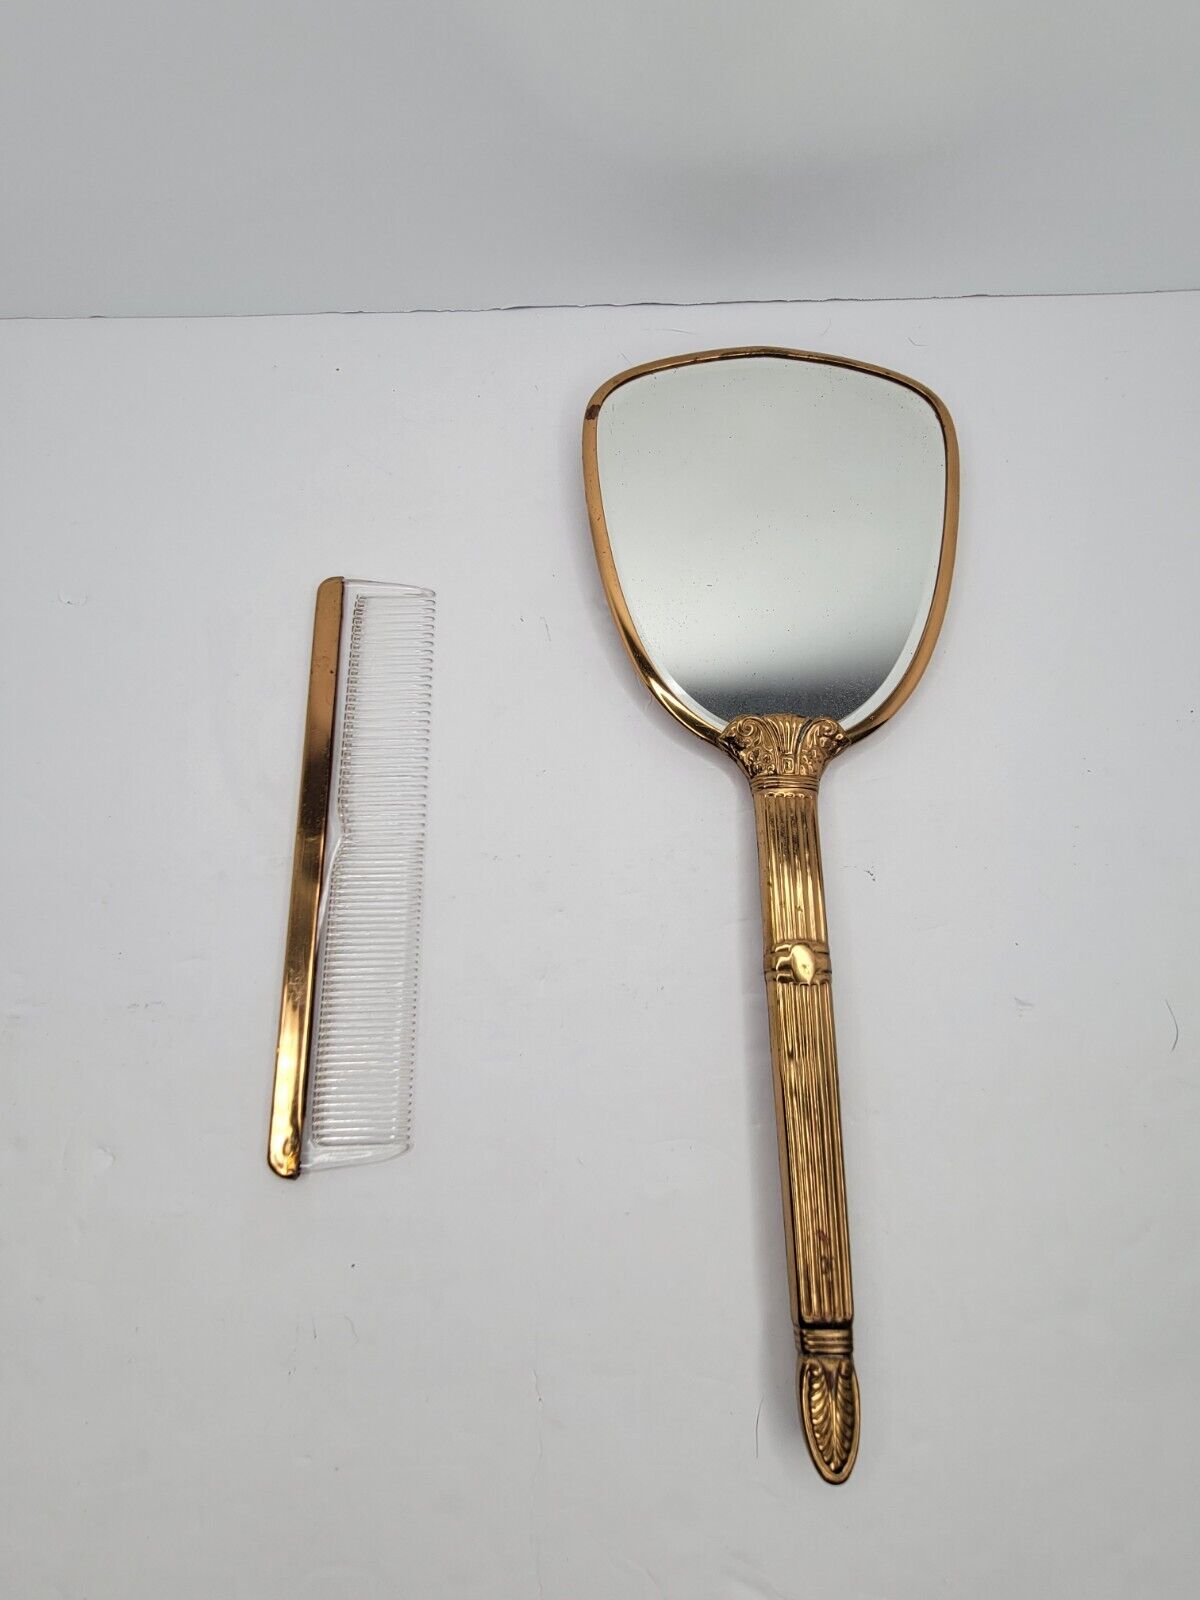 Vintage Hand Mirror Art Deco Gold Embroidered Vanity with Comb